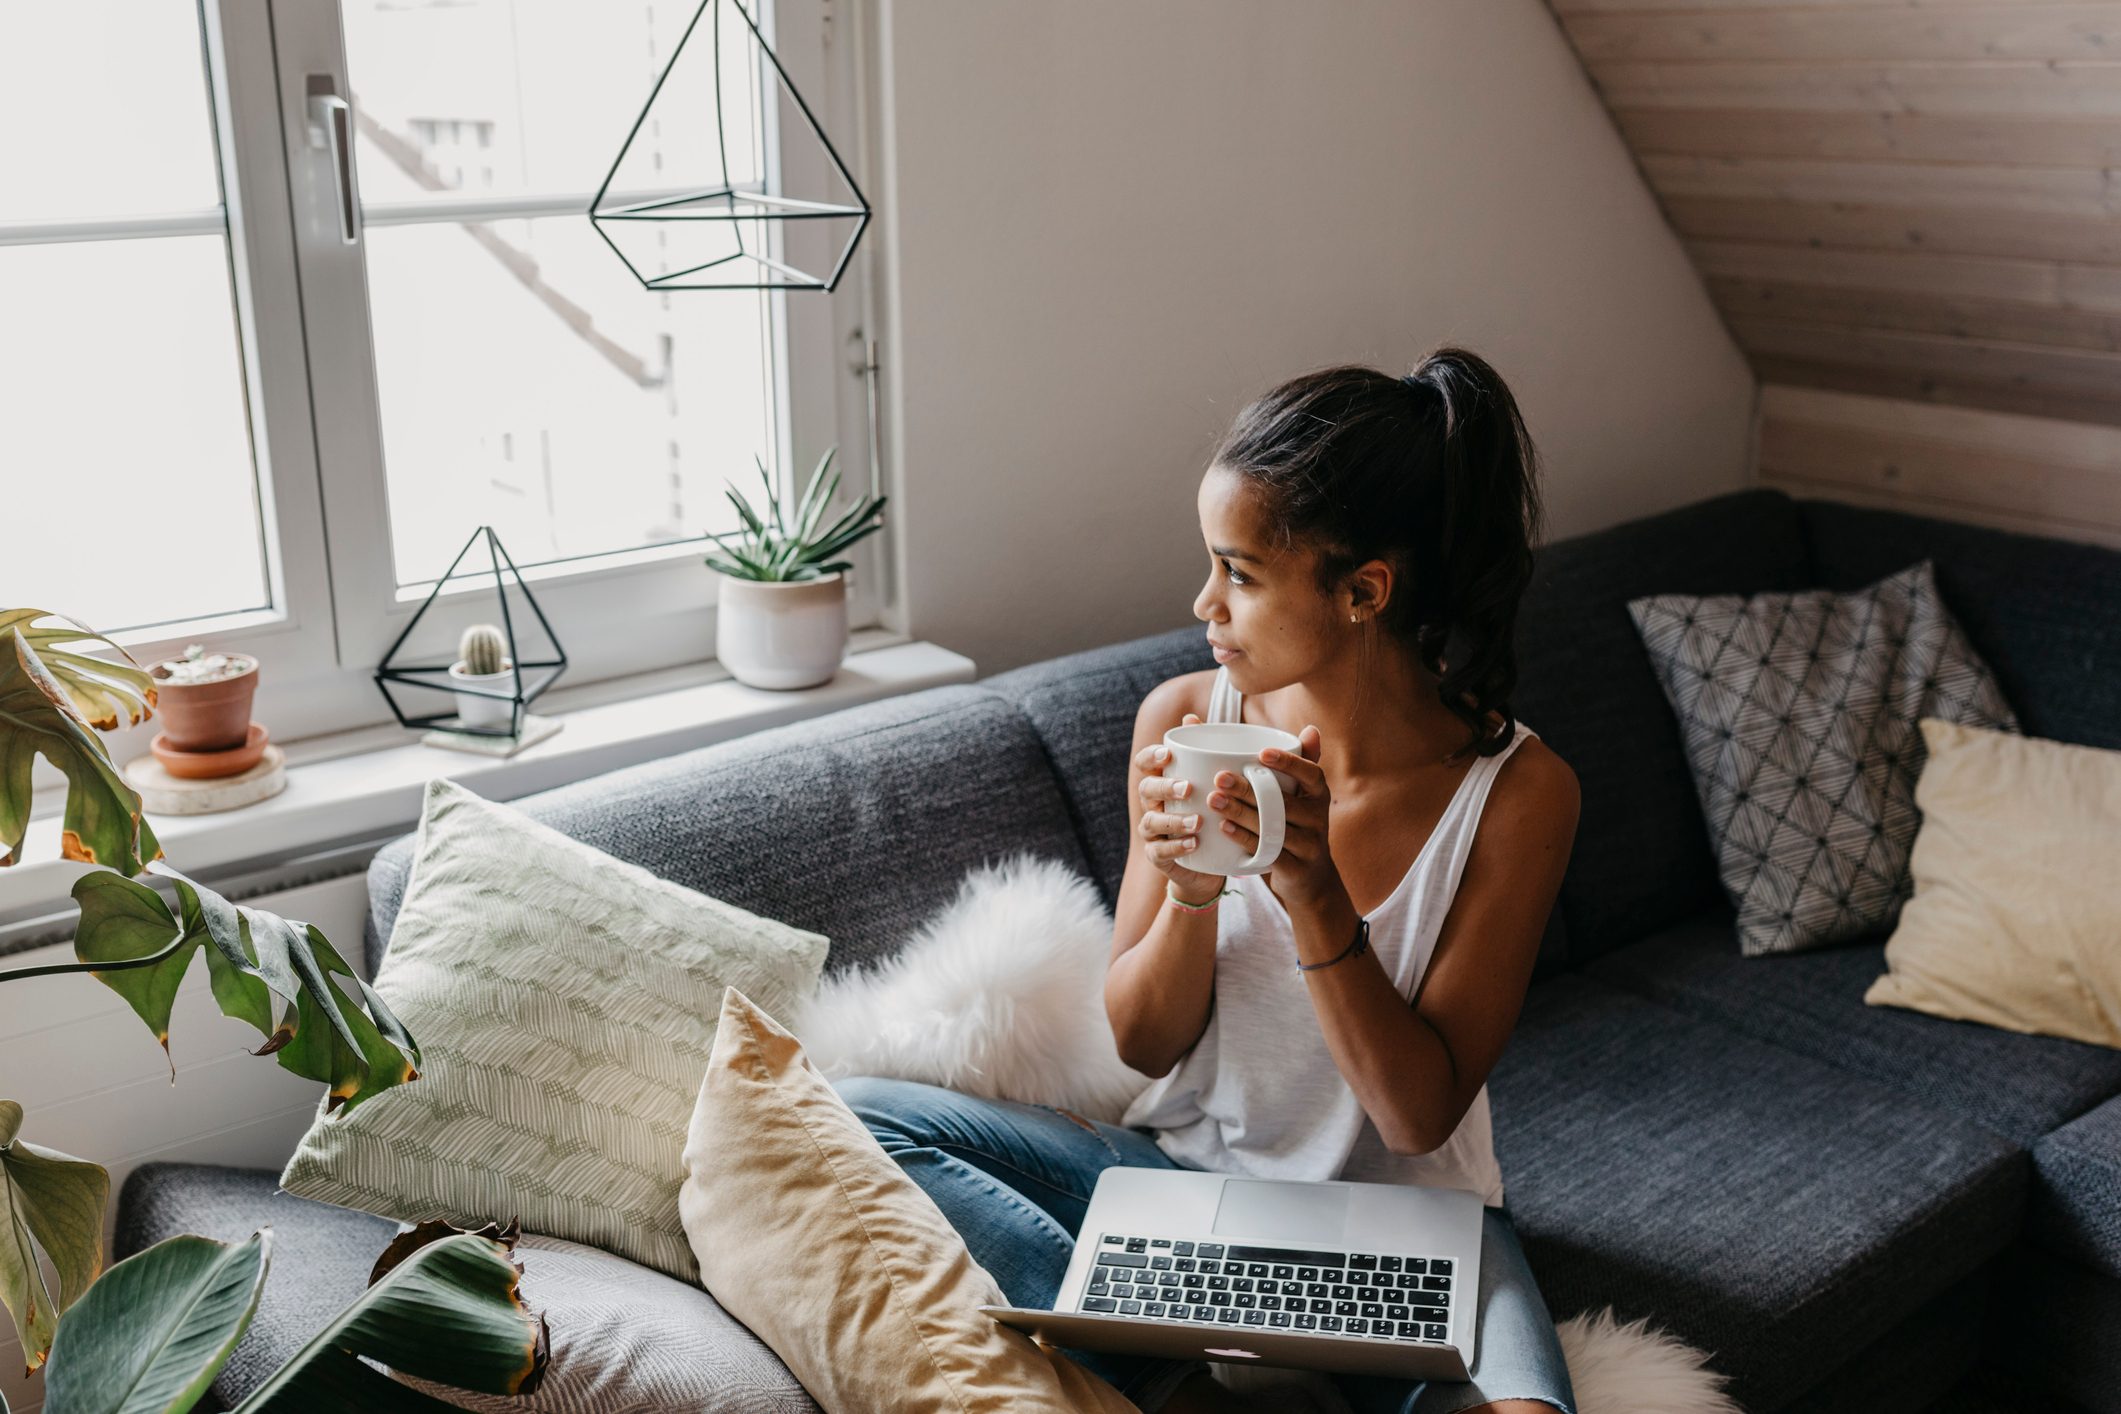 Young woman with laptop and cup of coffee sitting on the couch at home looking out of window